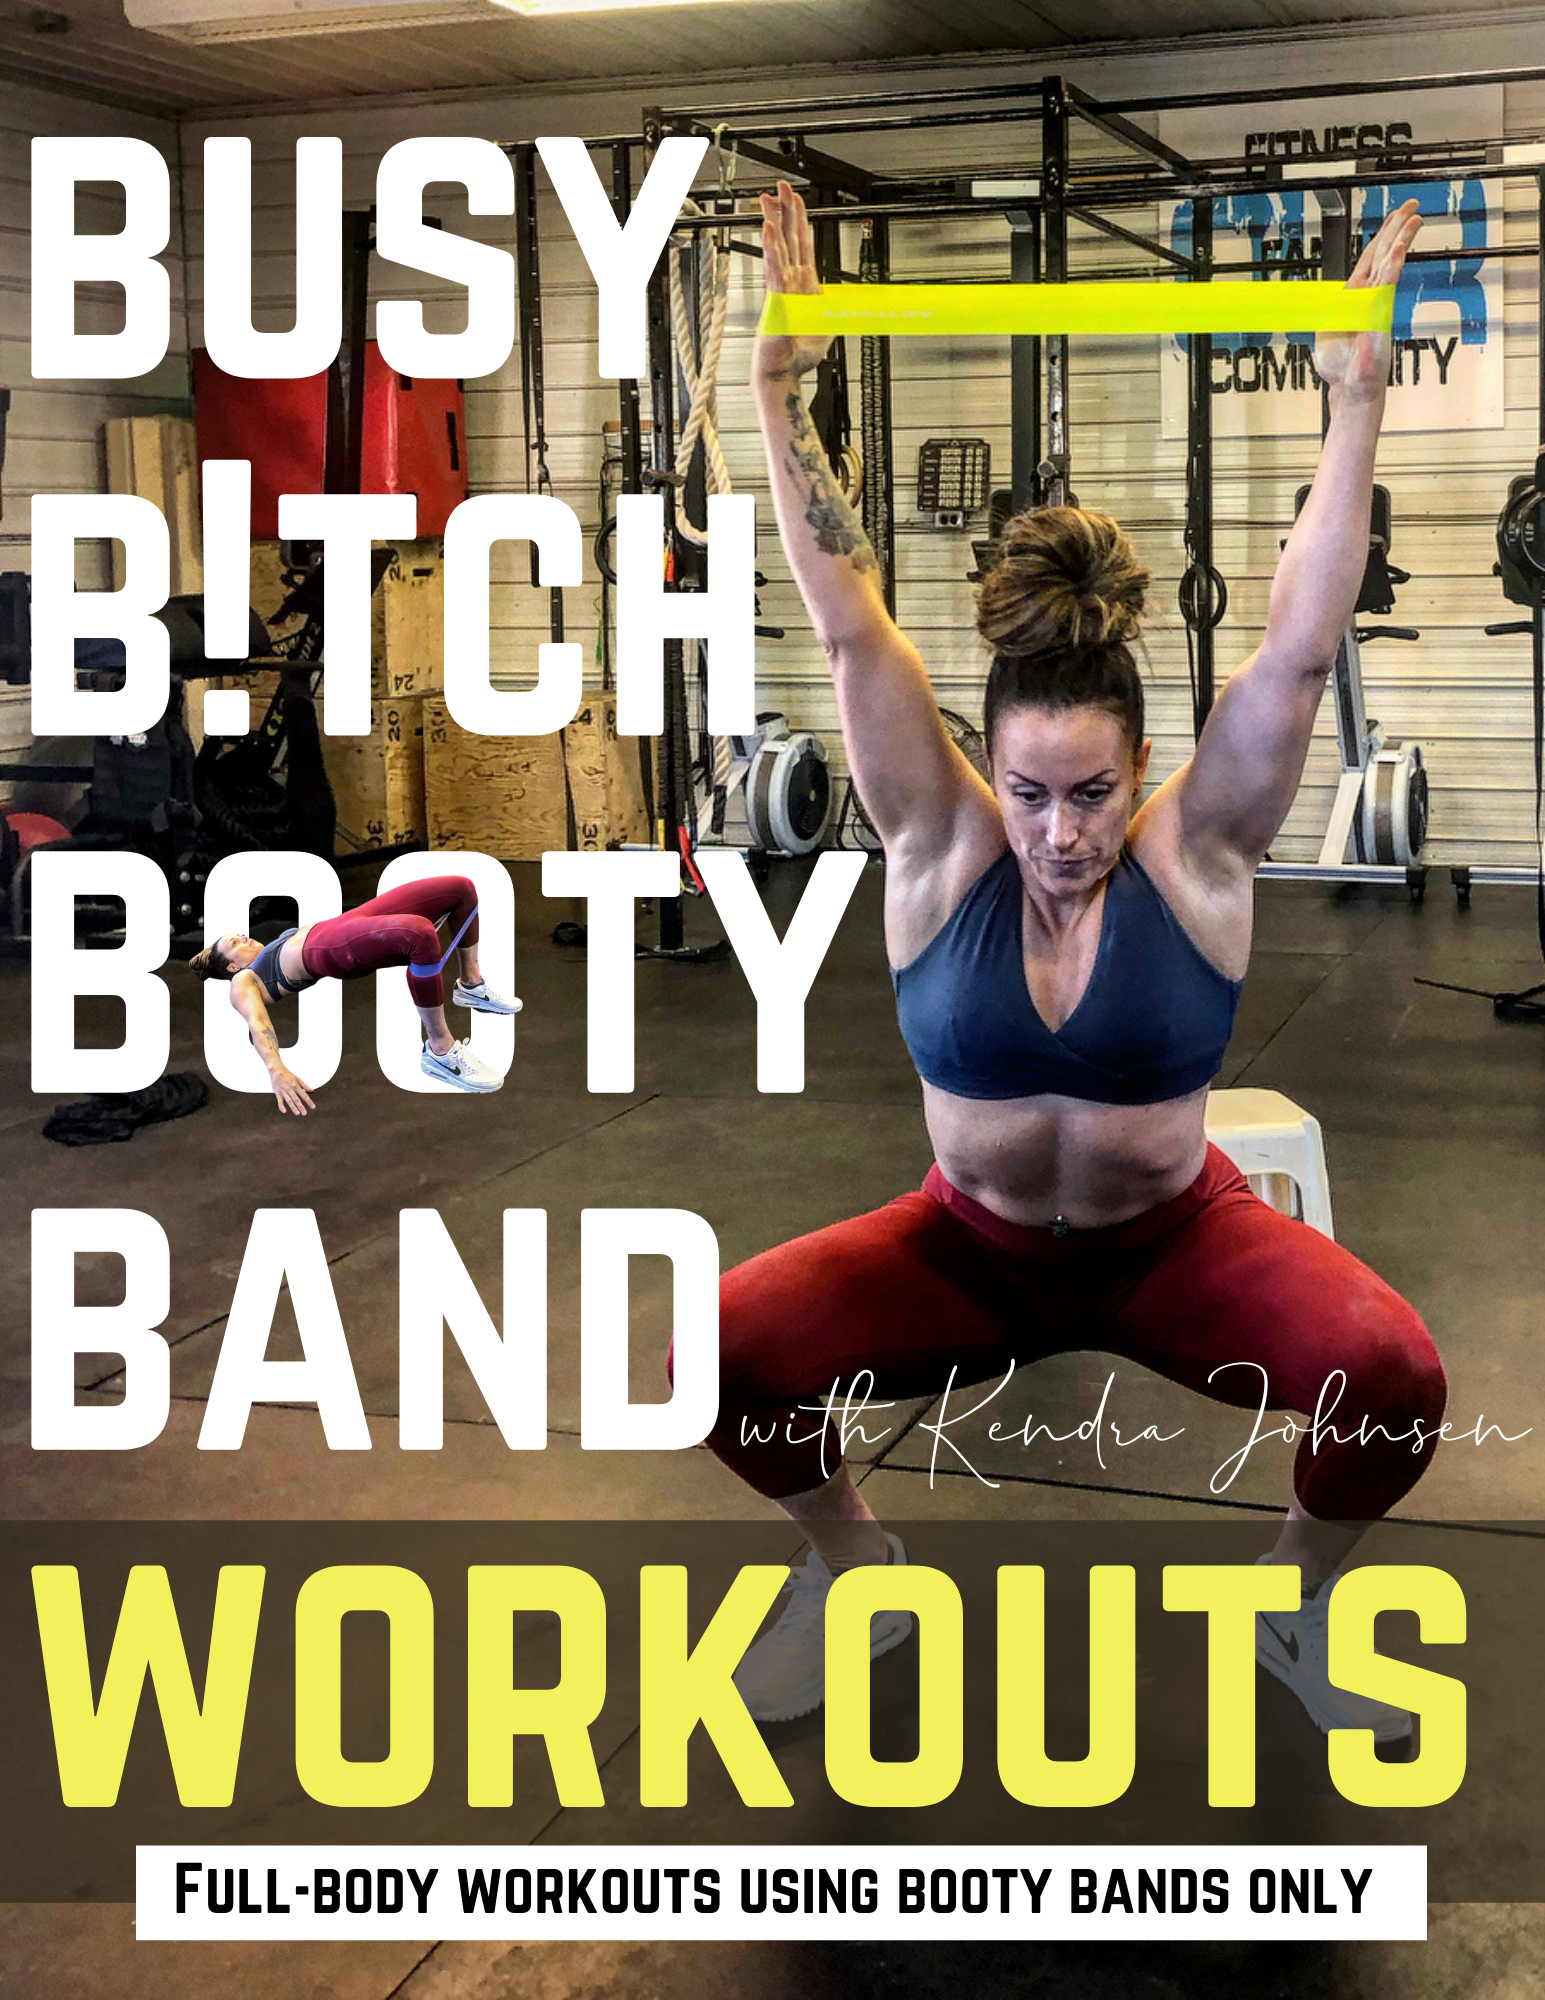 http://poisestrengthconditioning.com/wp-content/uploads/2021/03/bootybandcoverebook.png